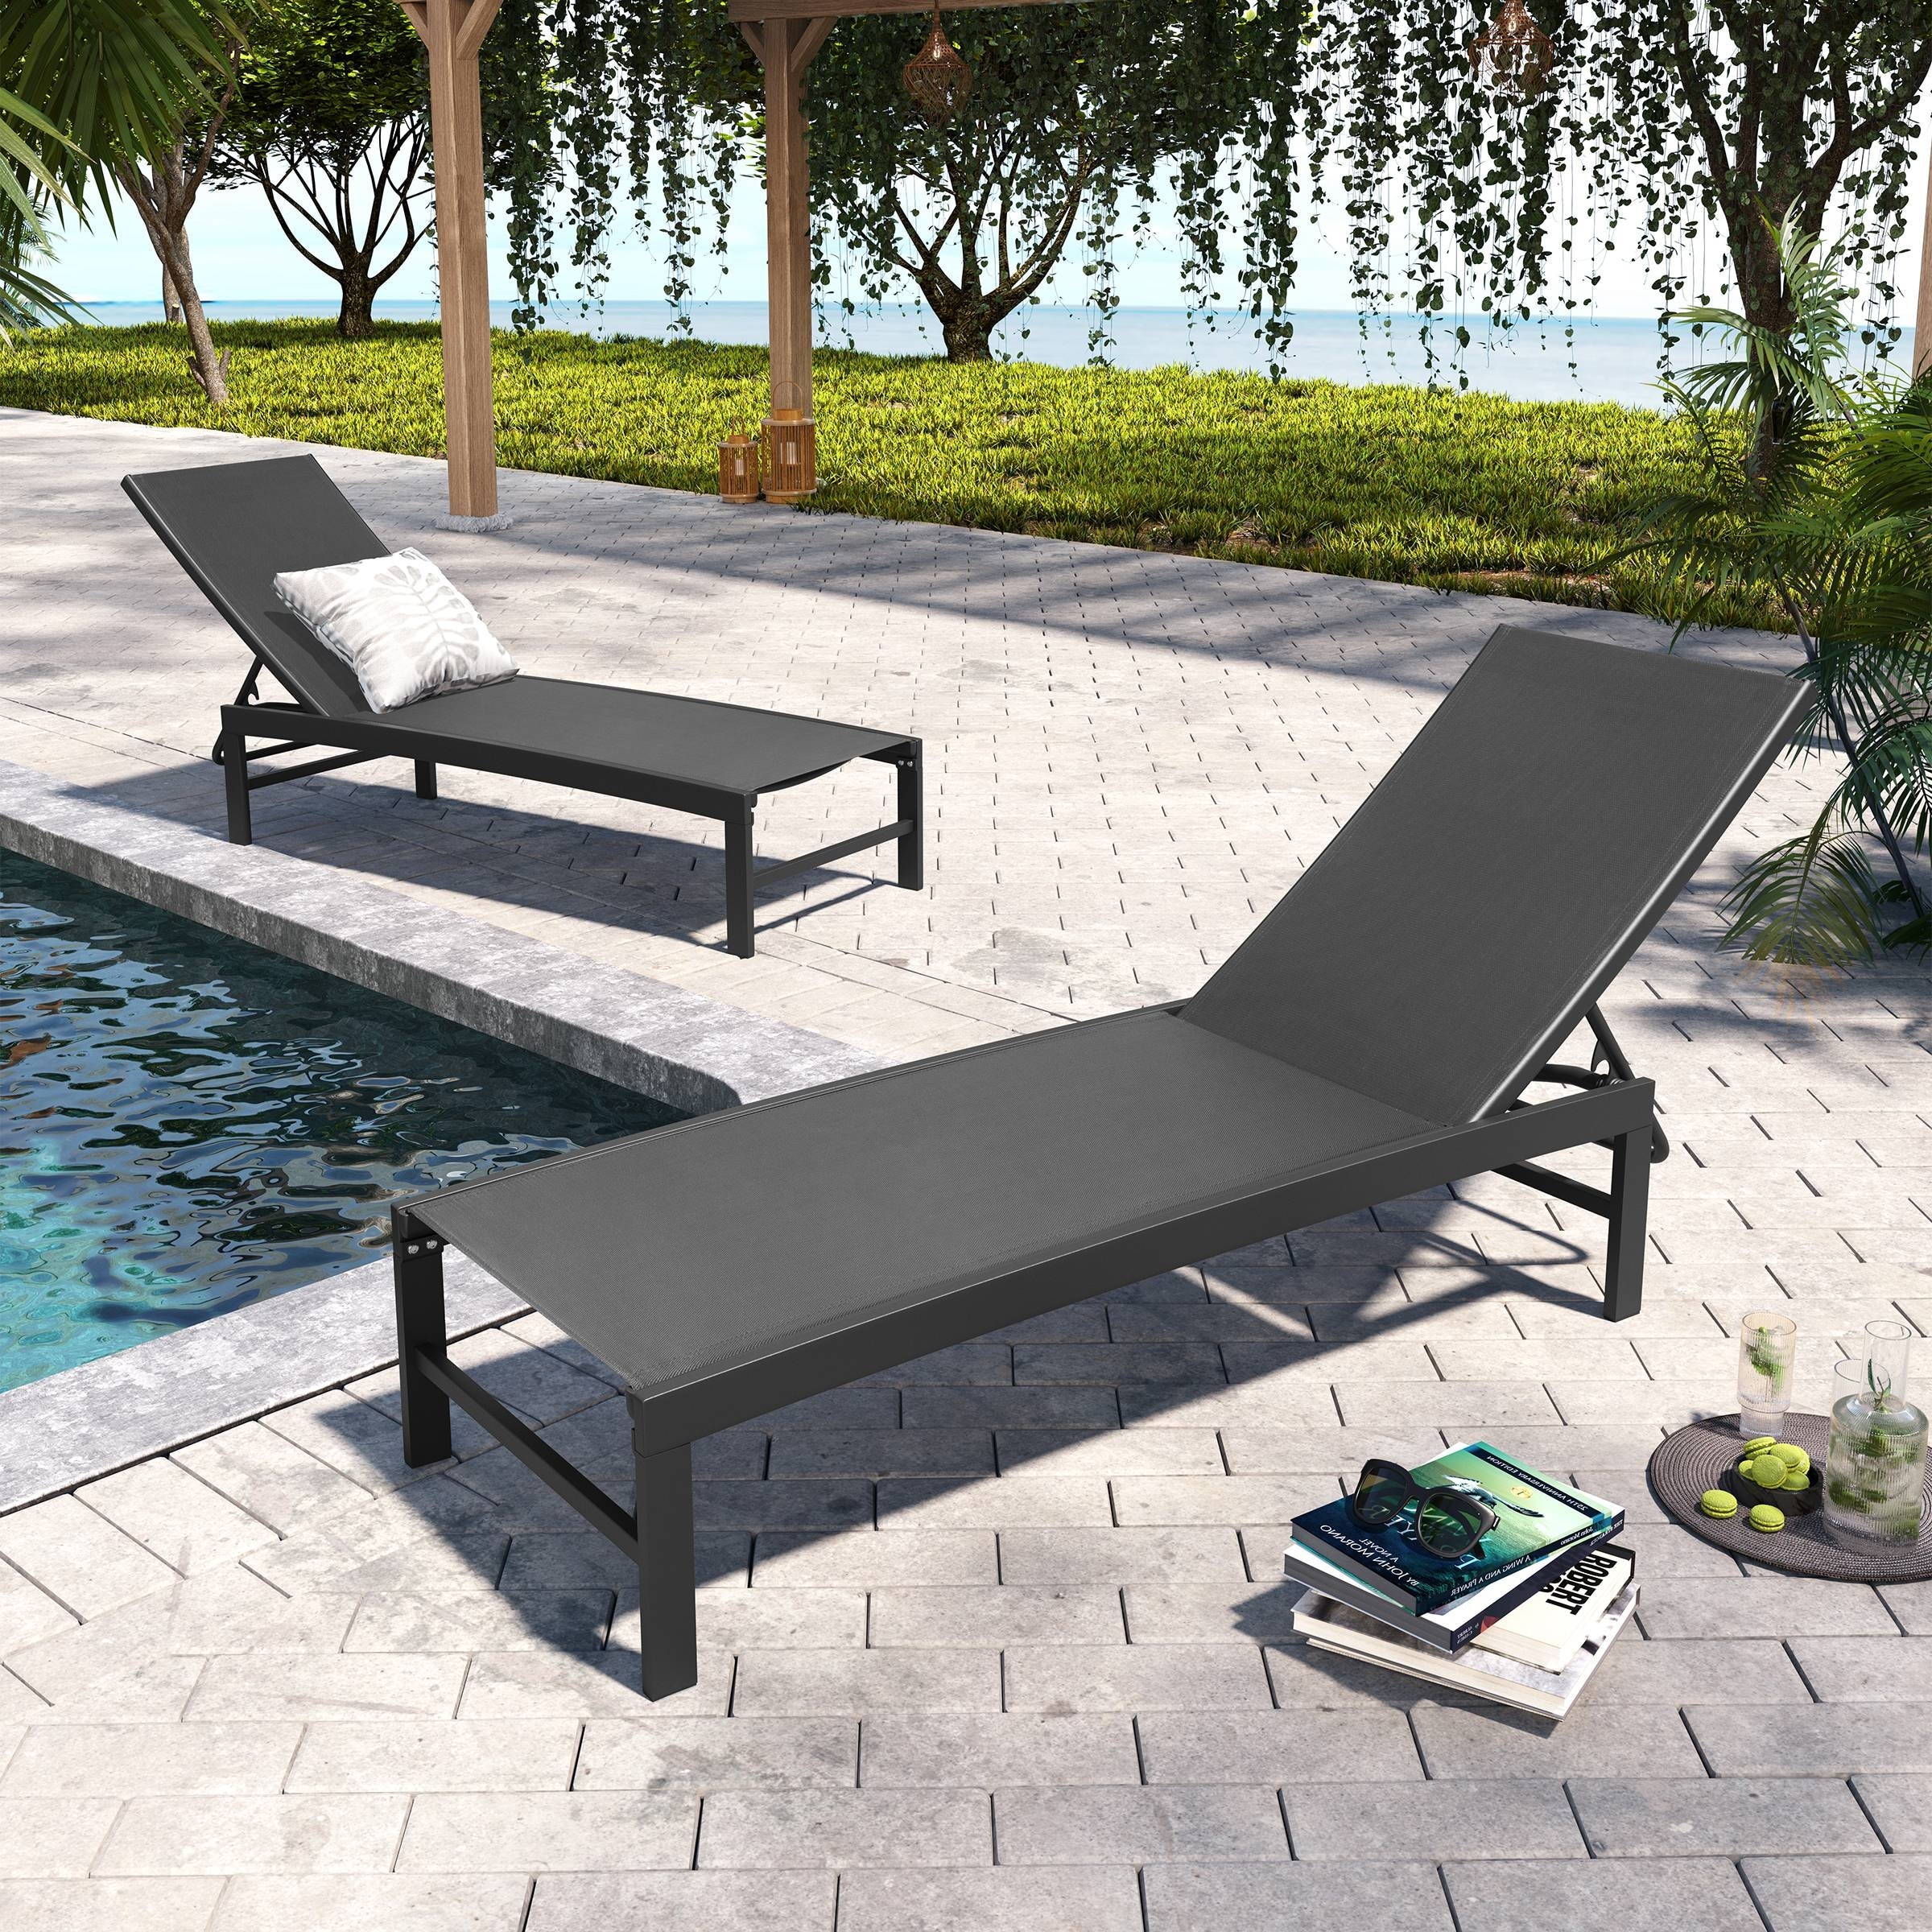 Outdoor Aluminum Adjustable Patio Chaise Lounge Chairs (set Of 2)